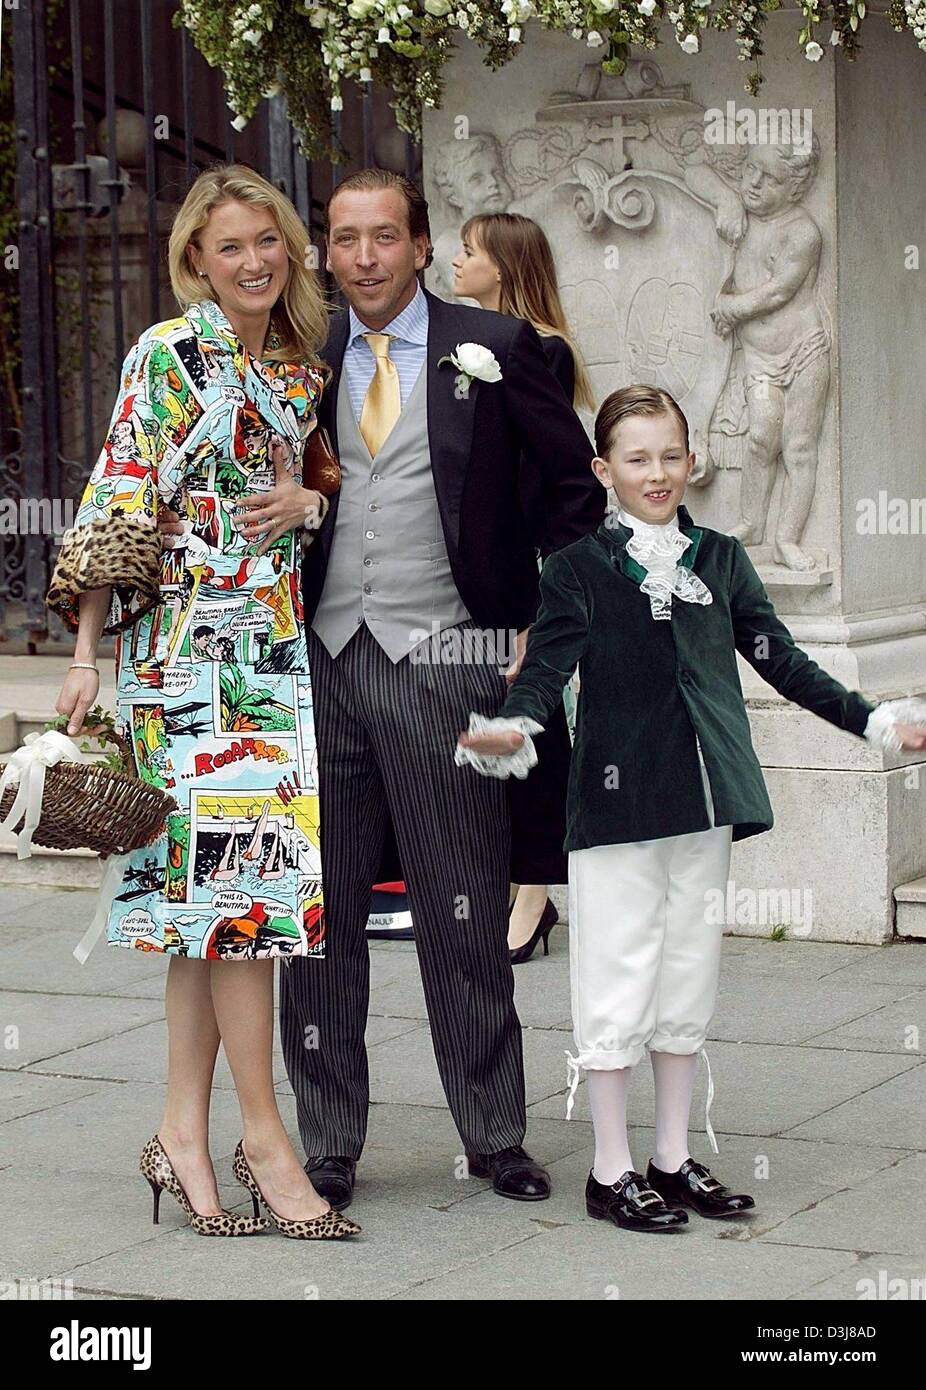 (dpa) - Lilly, princess of Schaumburg-Lippe (L) smiles as she arrives with her son prince Heinrich-Donatus (R) and her second husband and fashion designer Lambros Milona at the wedding of Sven Ley and Zoe Appleyard at the cathedral in Salzburg, Austria, 8 May 2004. Stock Photo